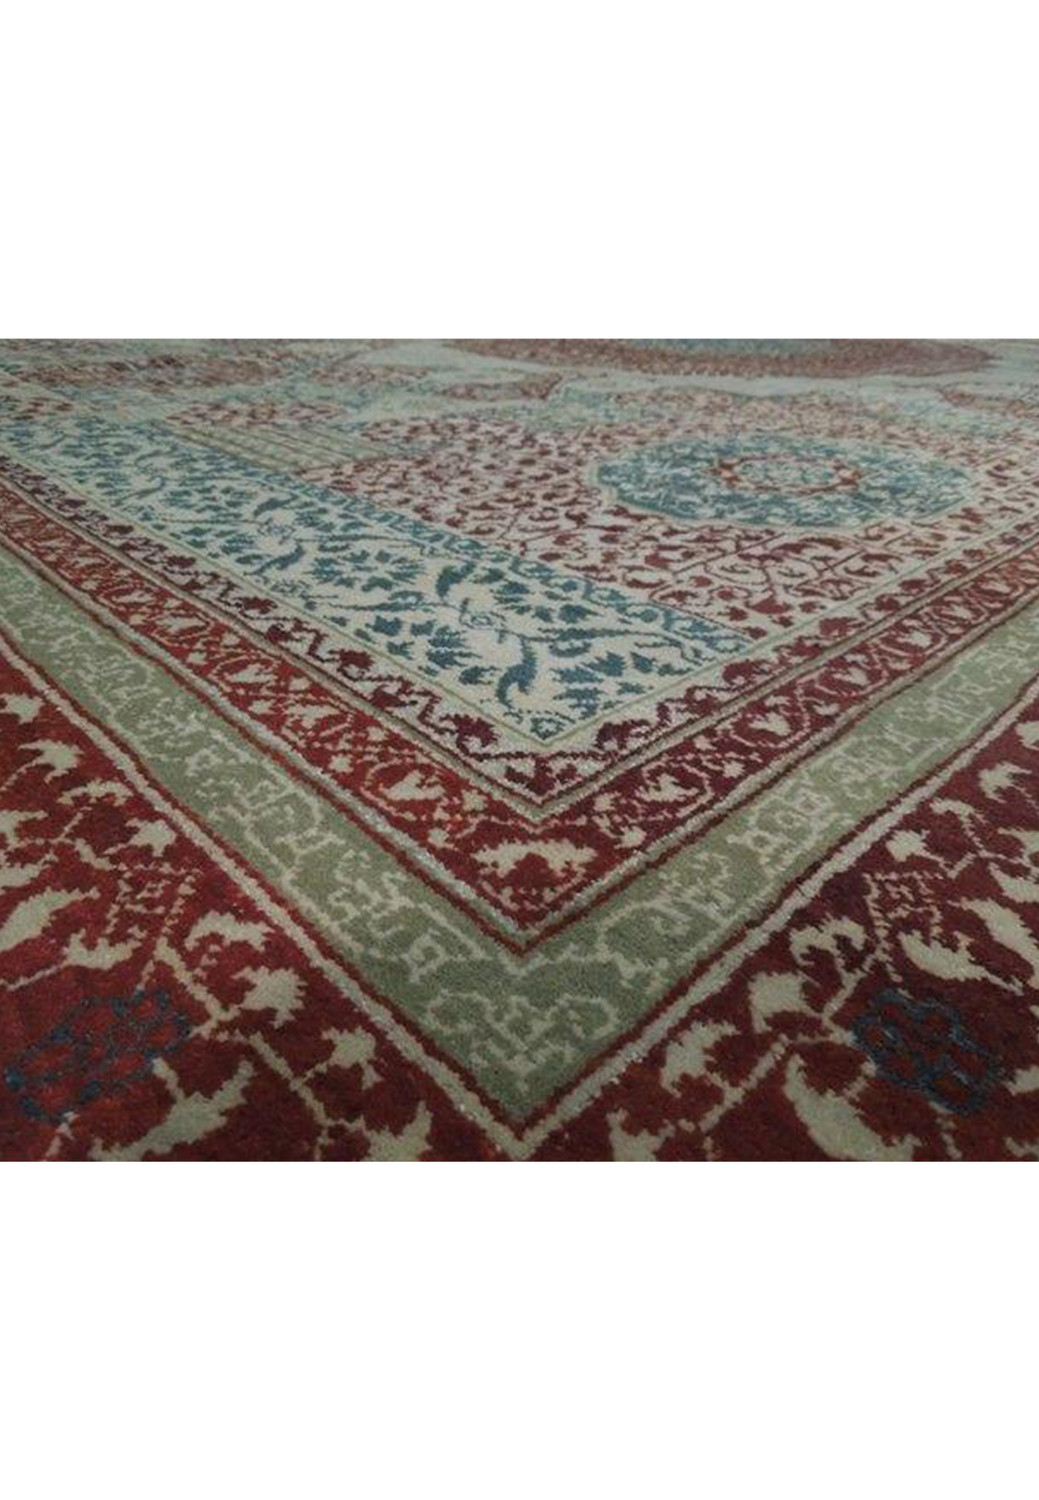 Angled shot of the authentic Agra rug highlighting its elaborate border designs and the interplay of burgundy, cream, and navy hues